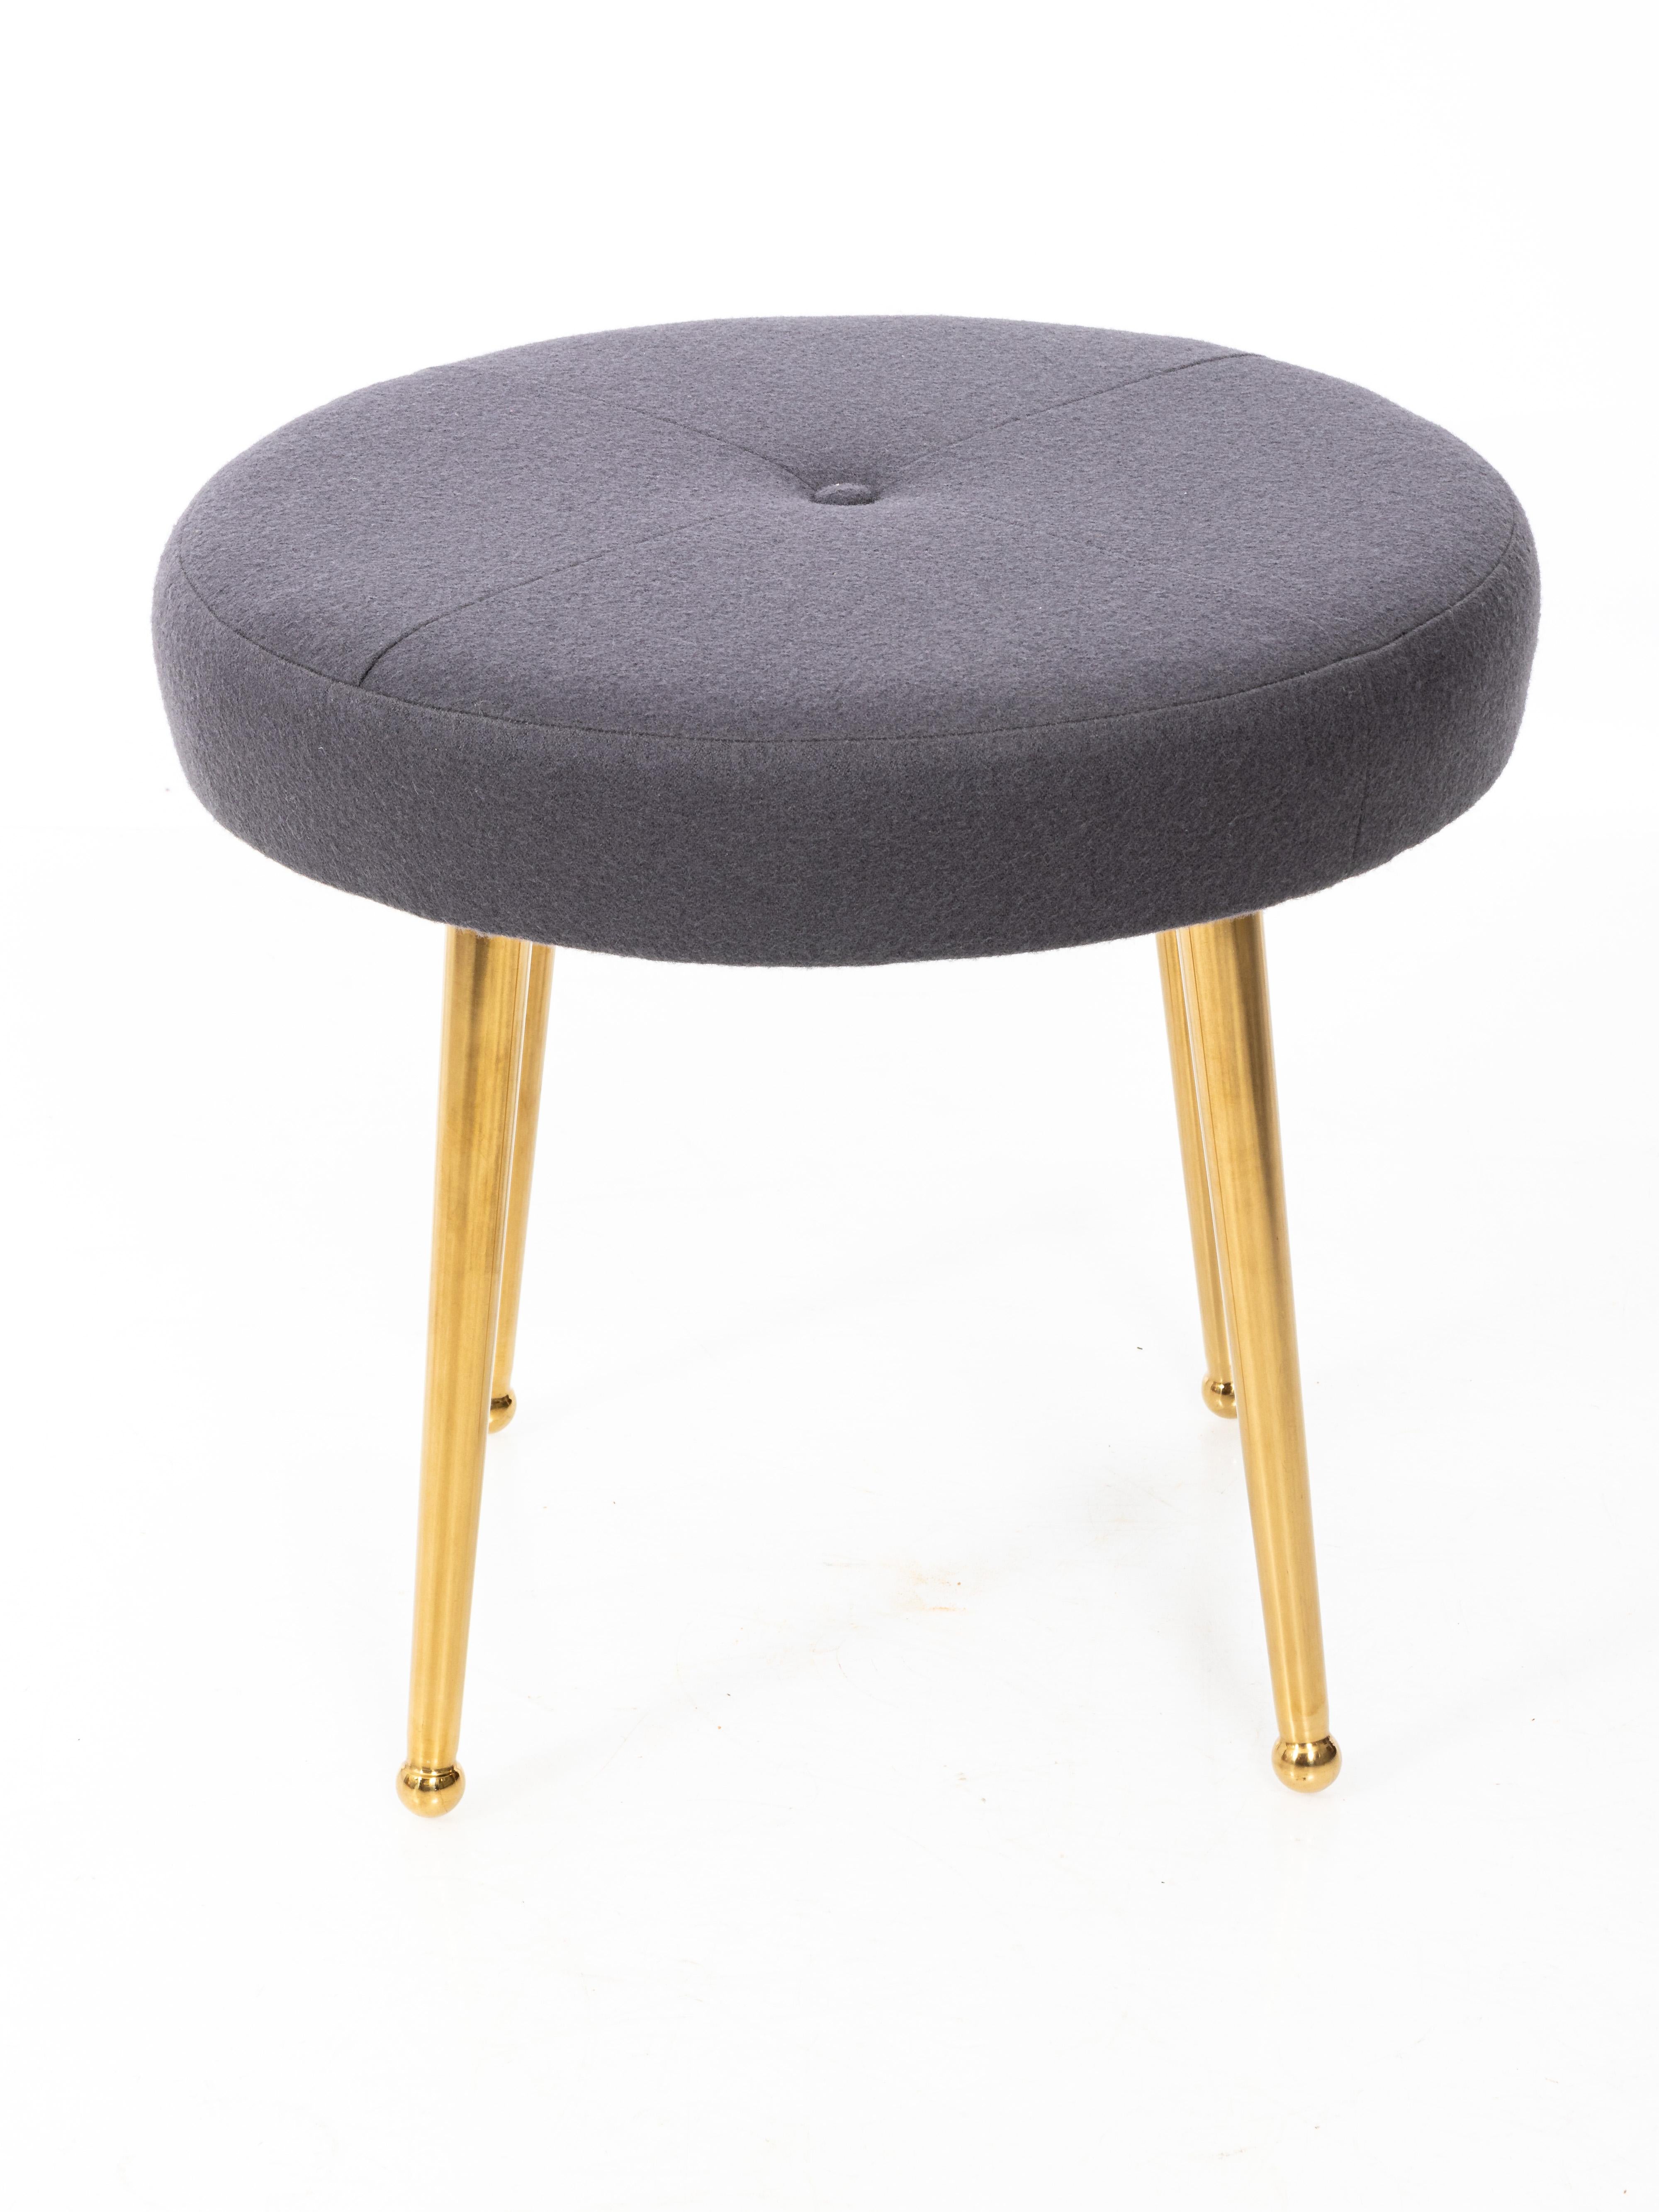 Custom Pair of Midcentury Style Round Stools with Brass Legs In New Condition For Sale In New York, NY